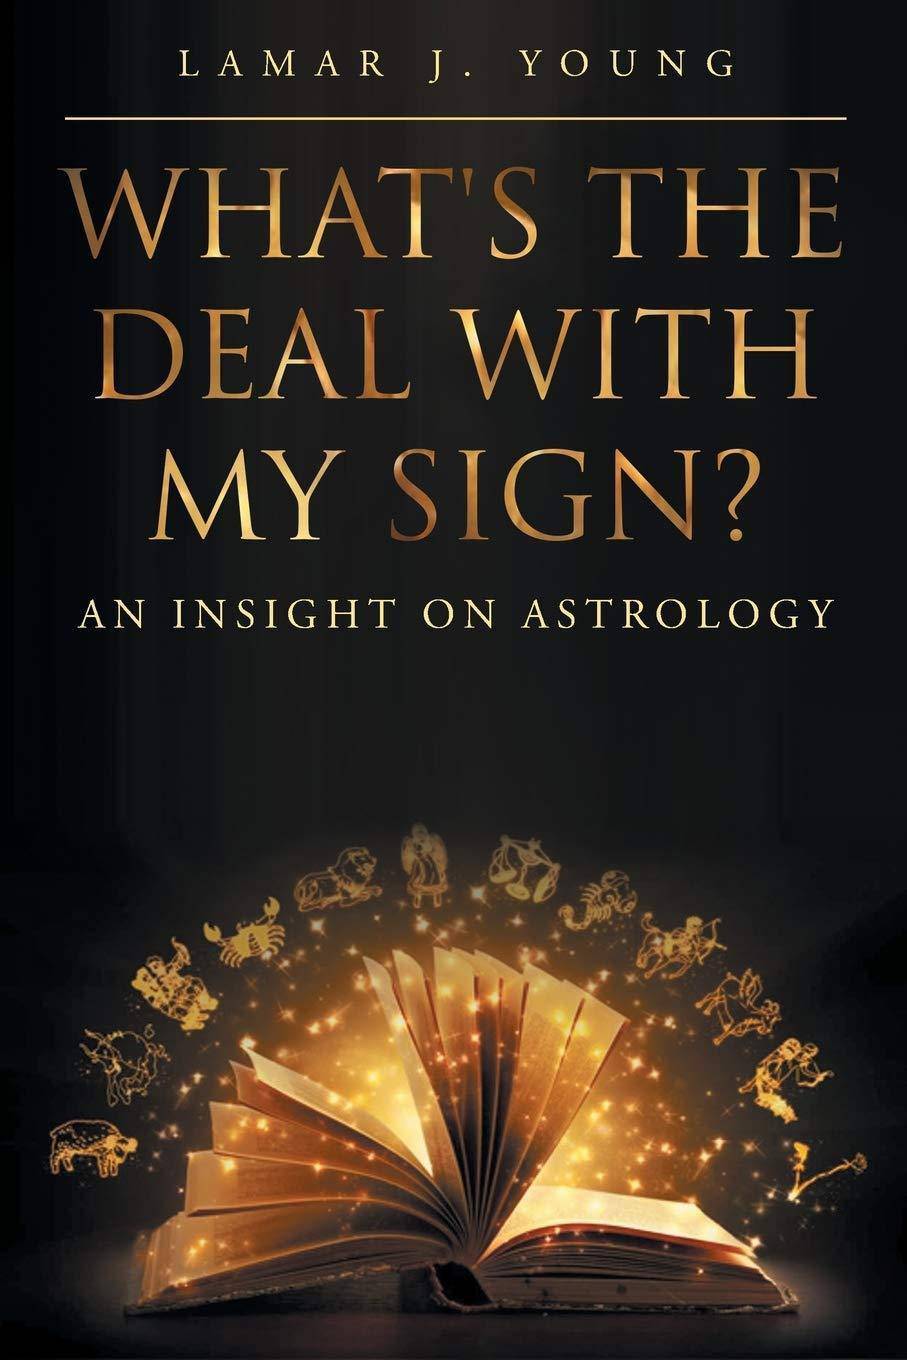 What's the Deal with My Sign? an Insight on Astrology - SureShot Books Publishing LLC